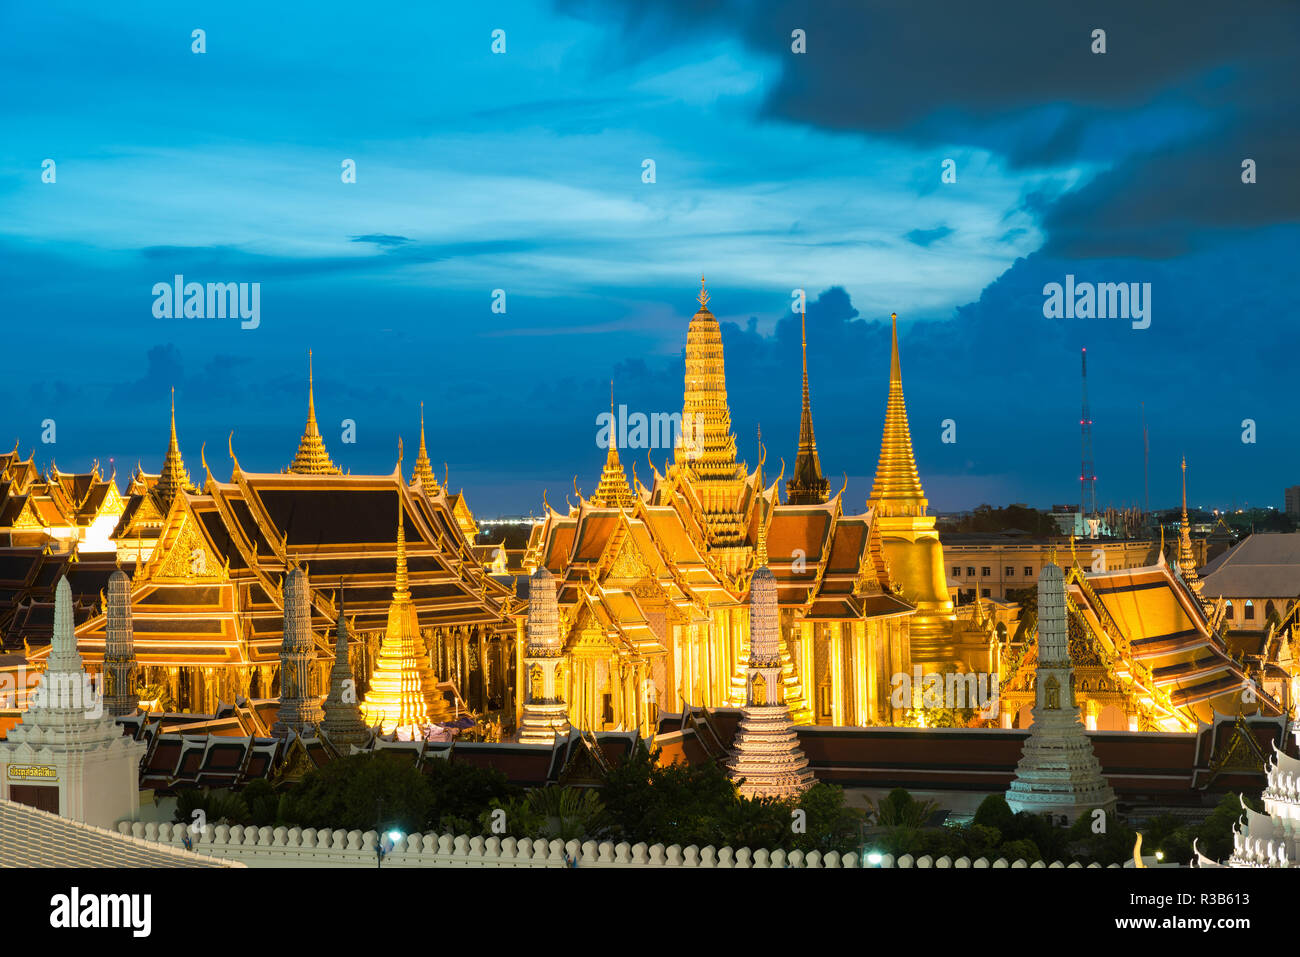 Wat phra keaw is famous landmark for tourism in Thailand at night in Bangkok, Thailand. Stock Photo